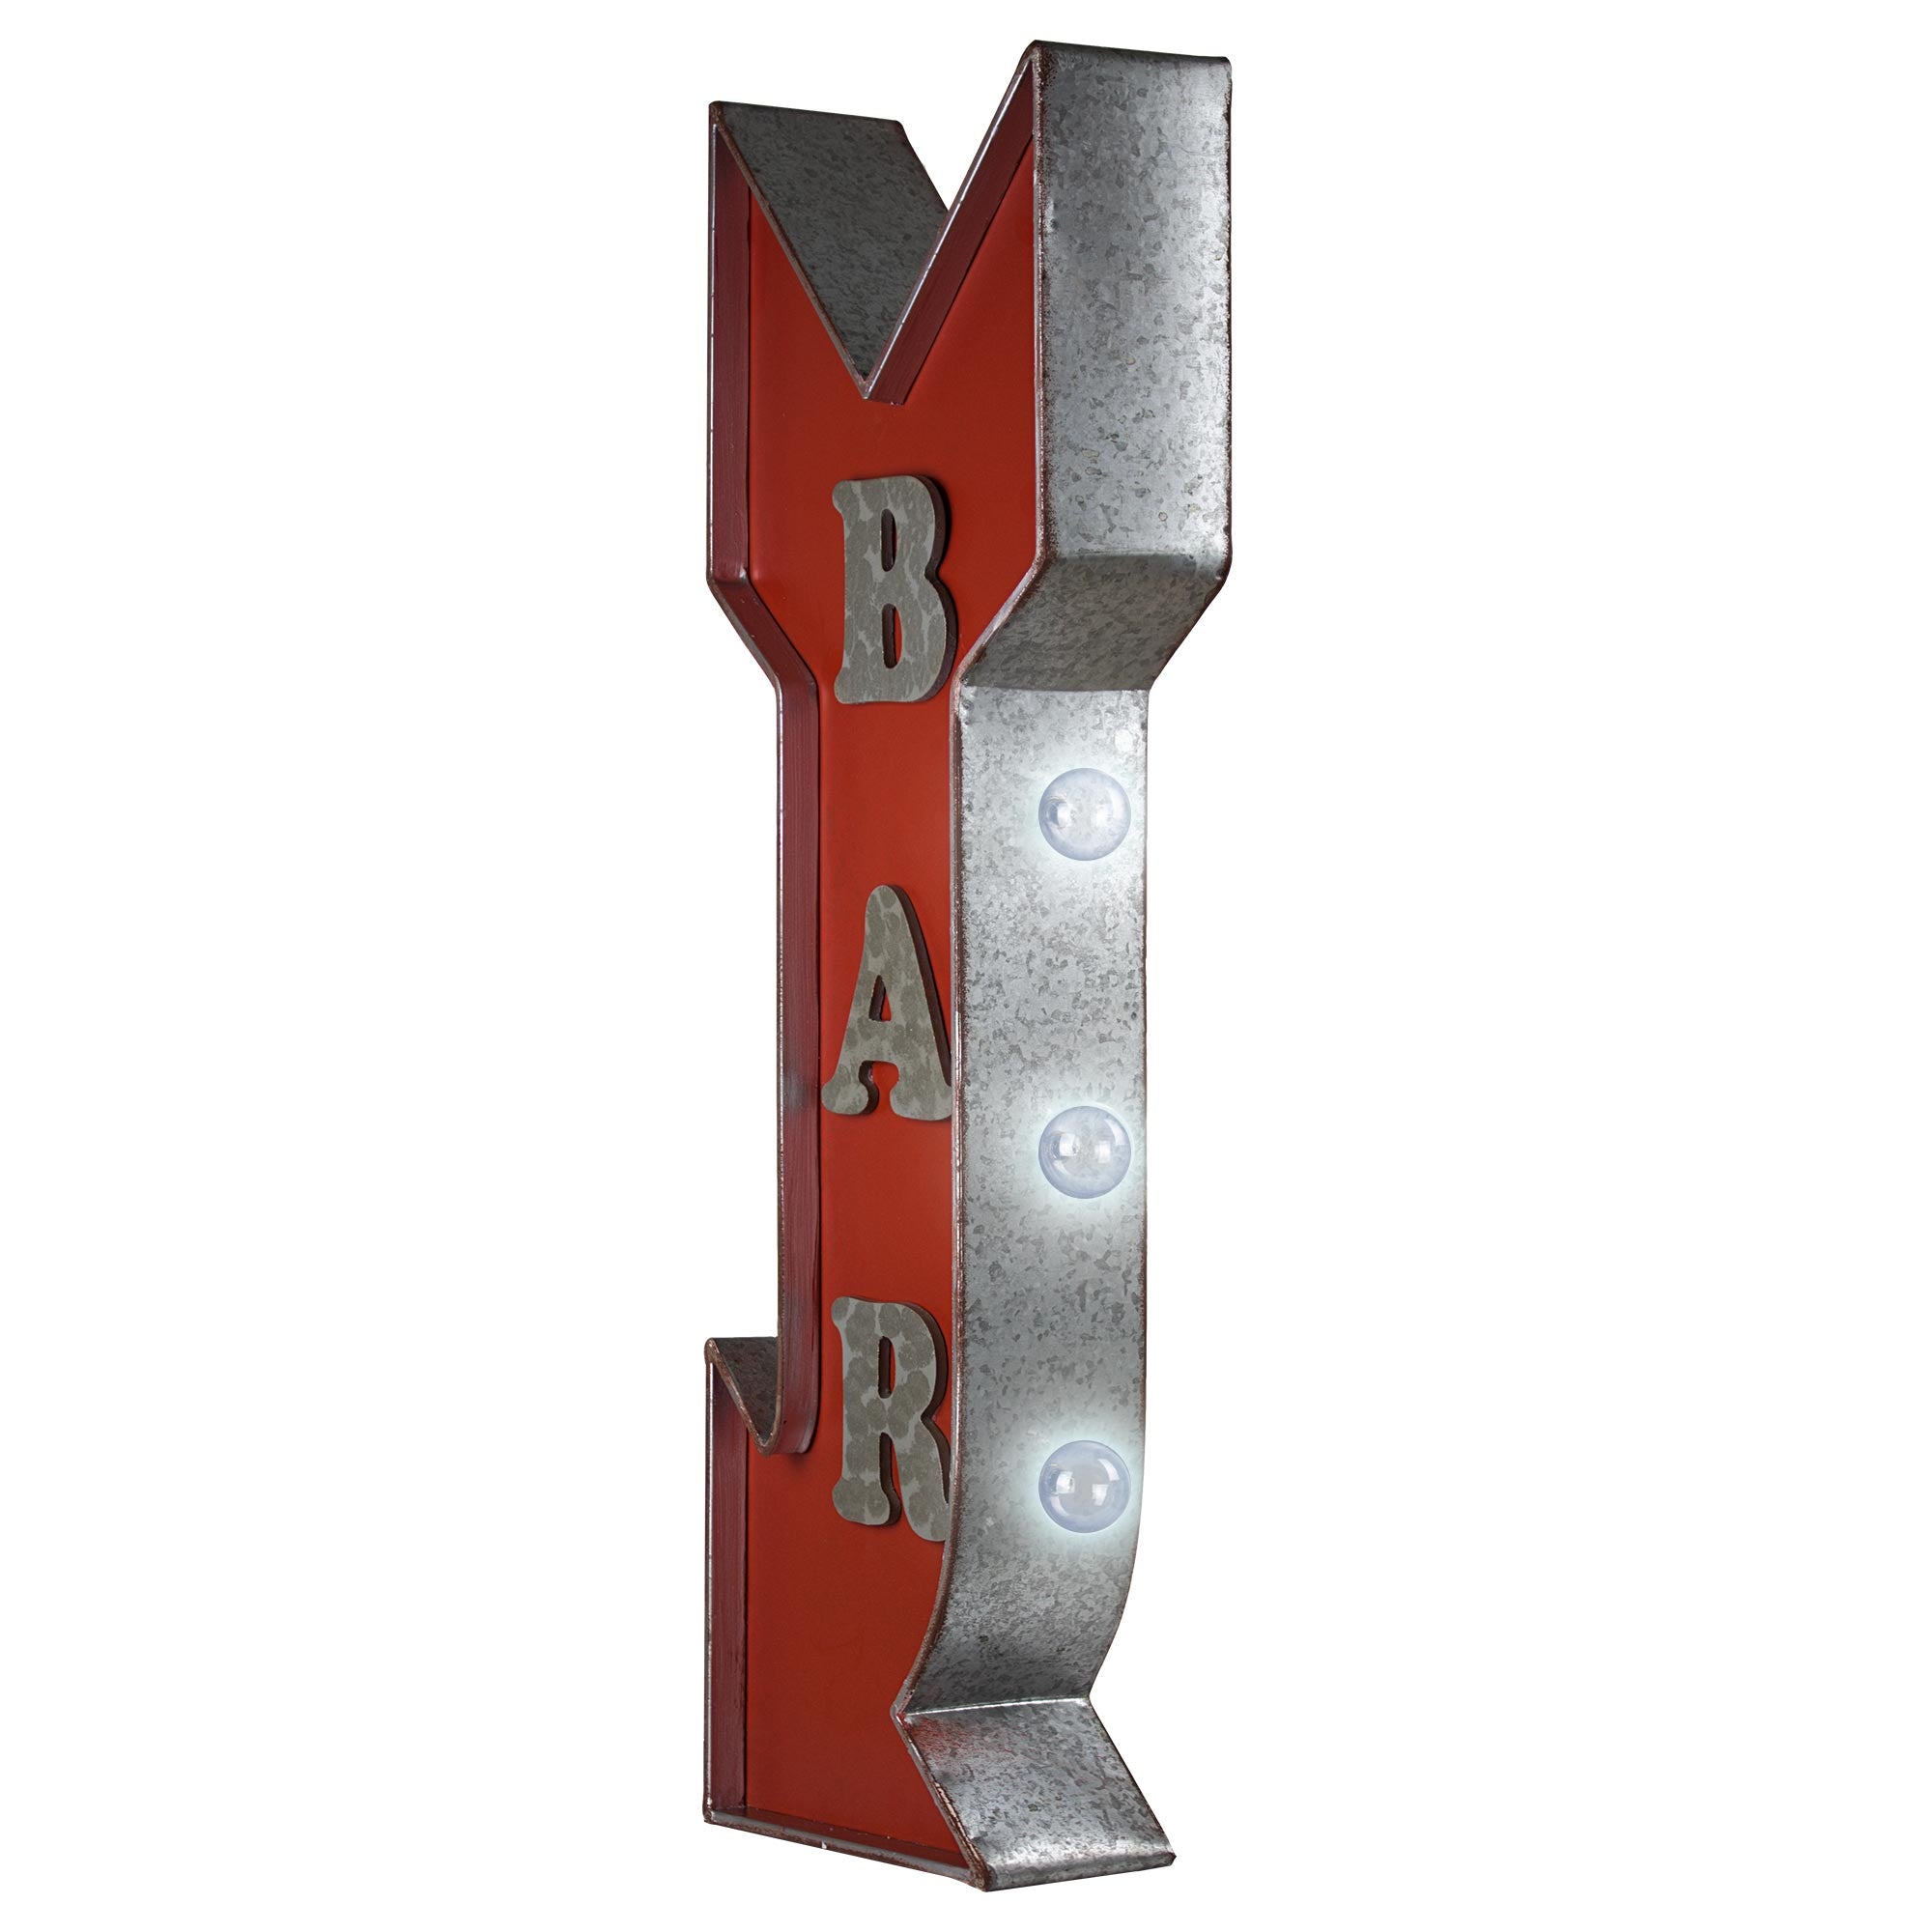 American Art Décor Bar Arrow LED Sign in Red 30 x